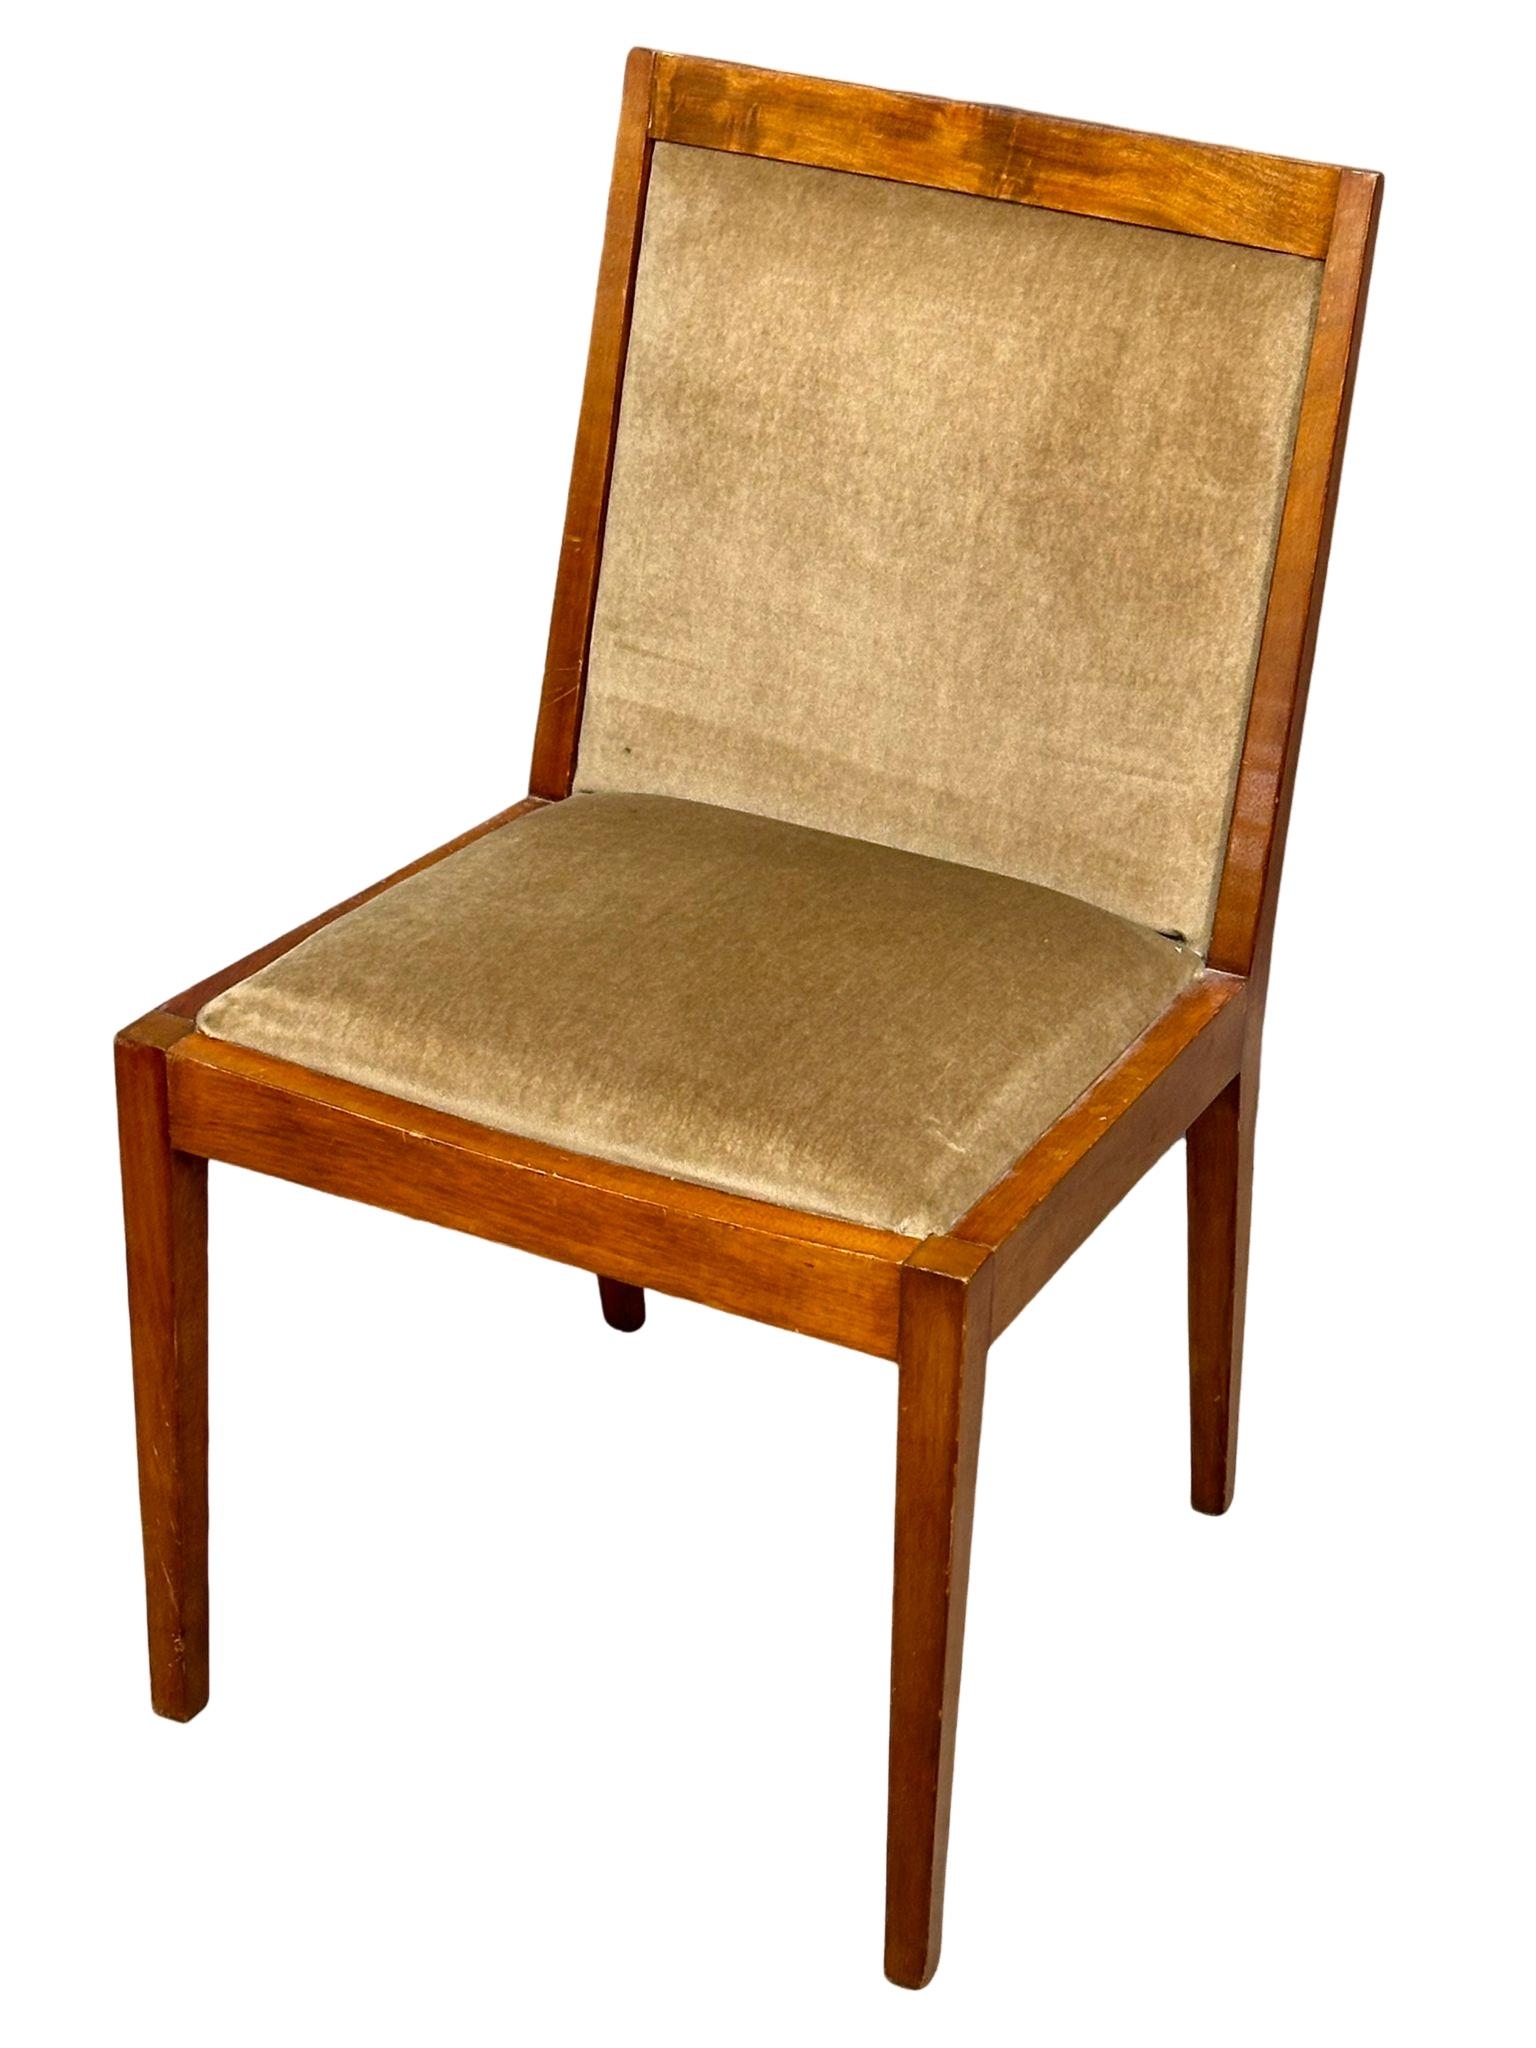 A set of 4 Mid Century teak dining chairs.(1) - Image 4 of 6